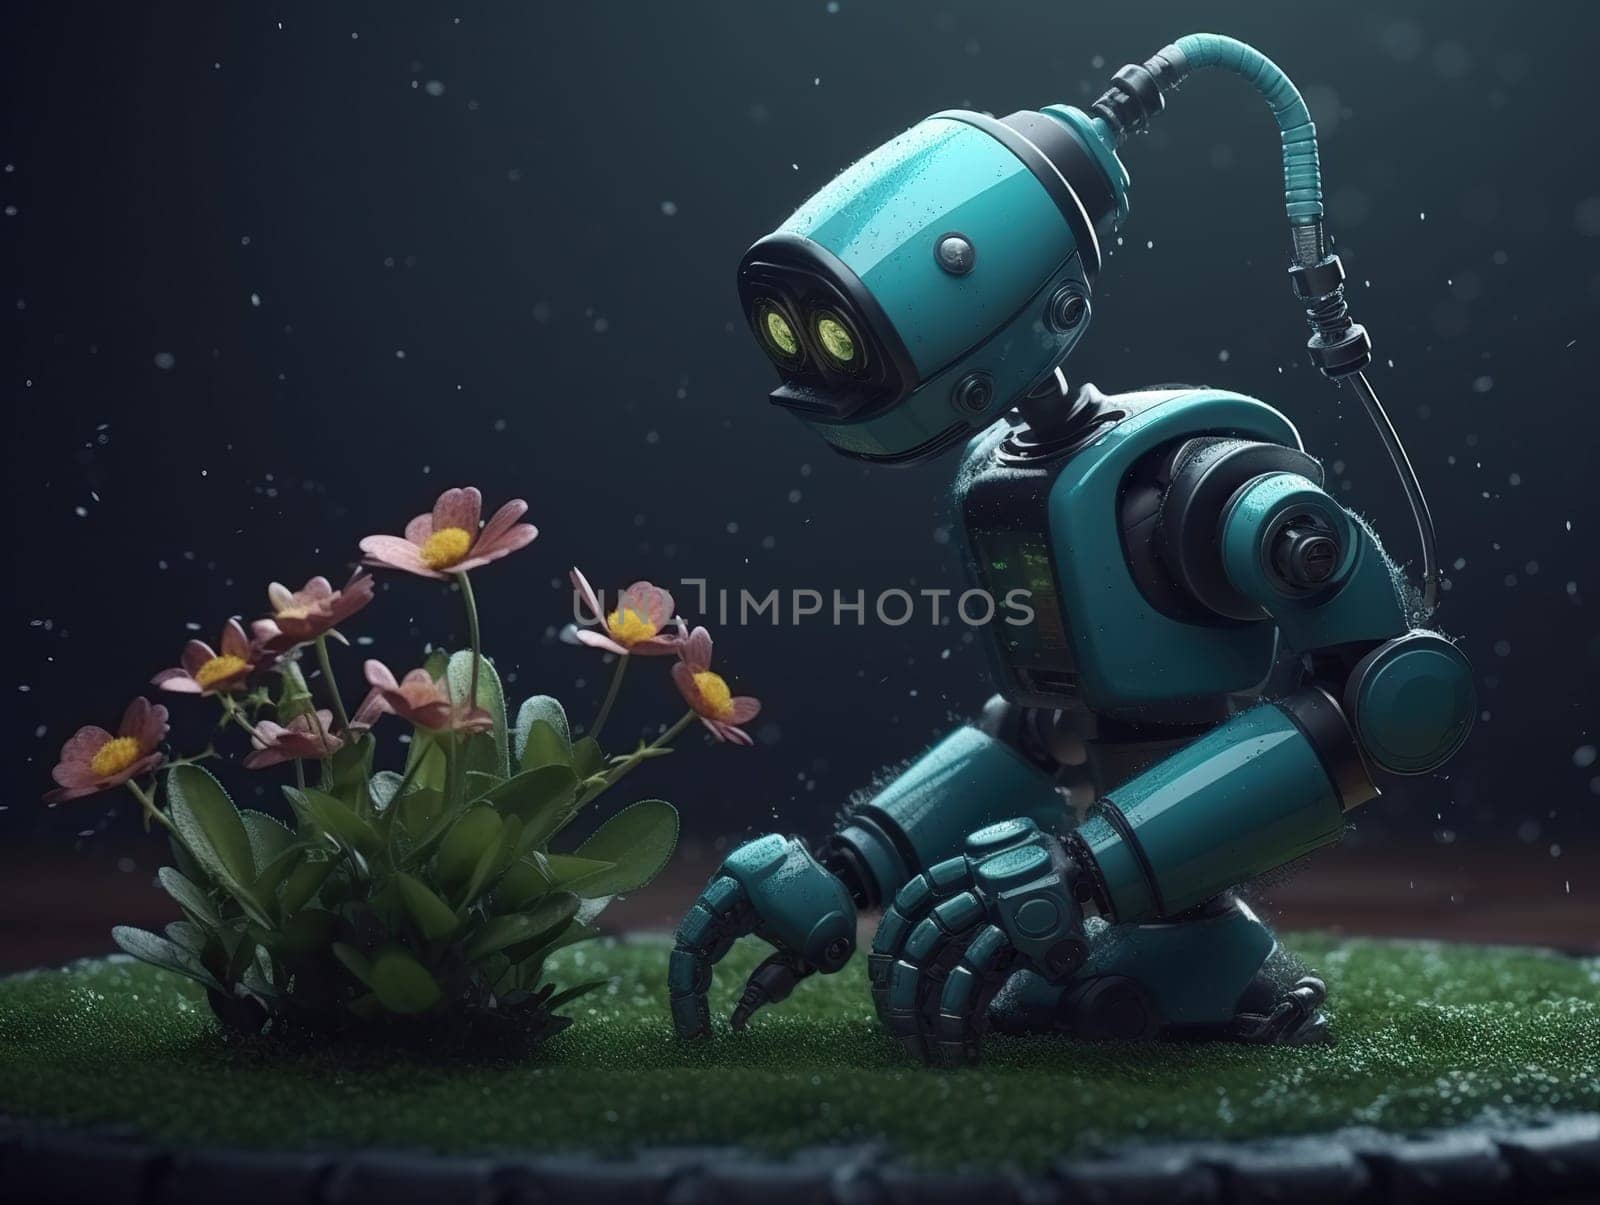 Illustration Of Old Robot Grows Flowers by tan4ikk1